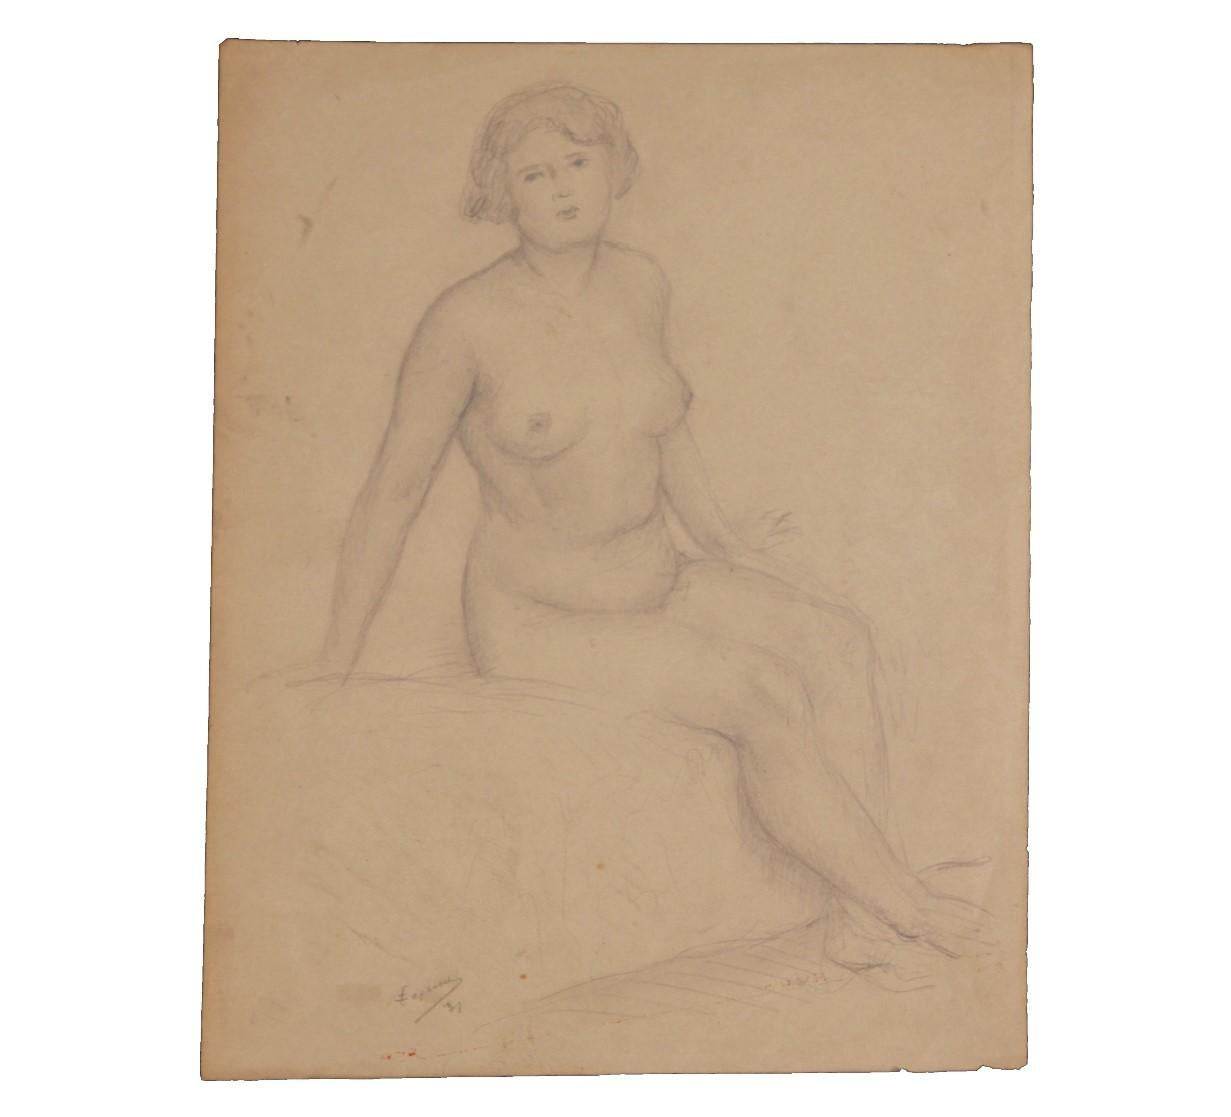 Naturalistic Seated Nude Woman Study - Art by Emile Lejeune